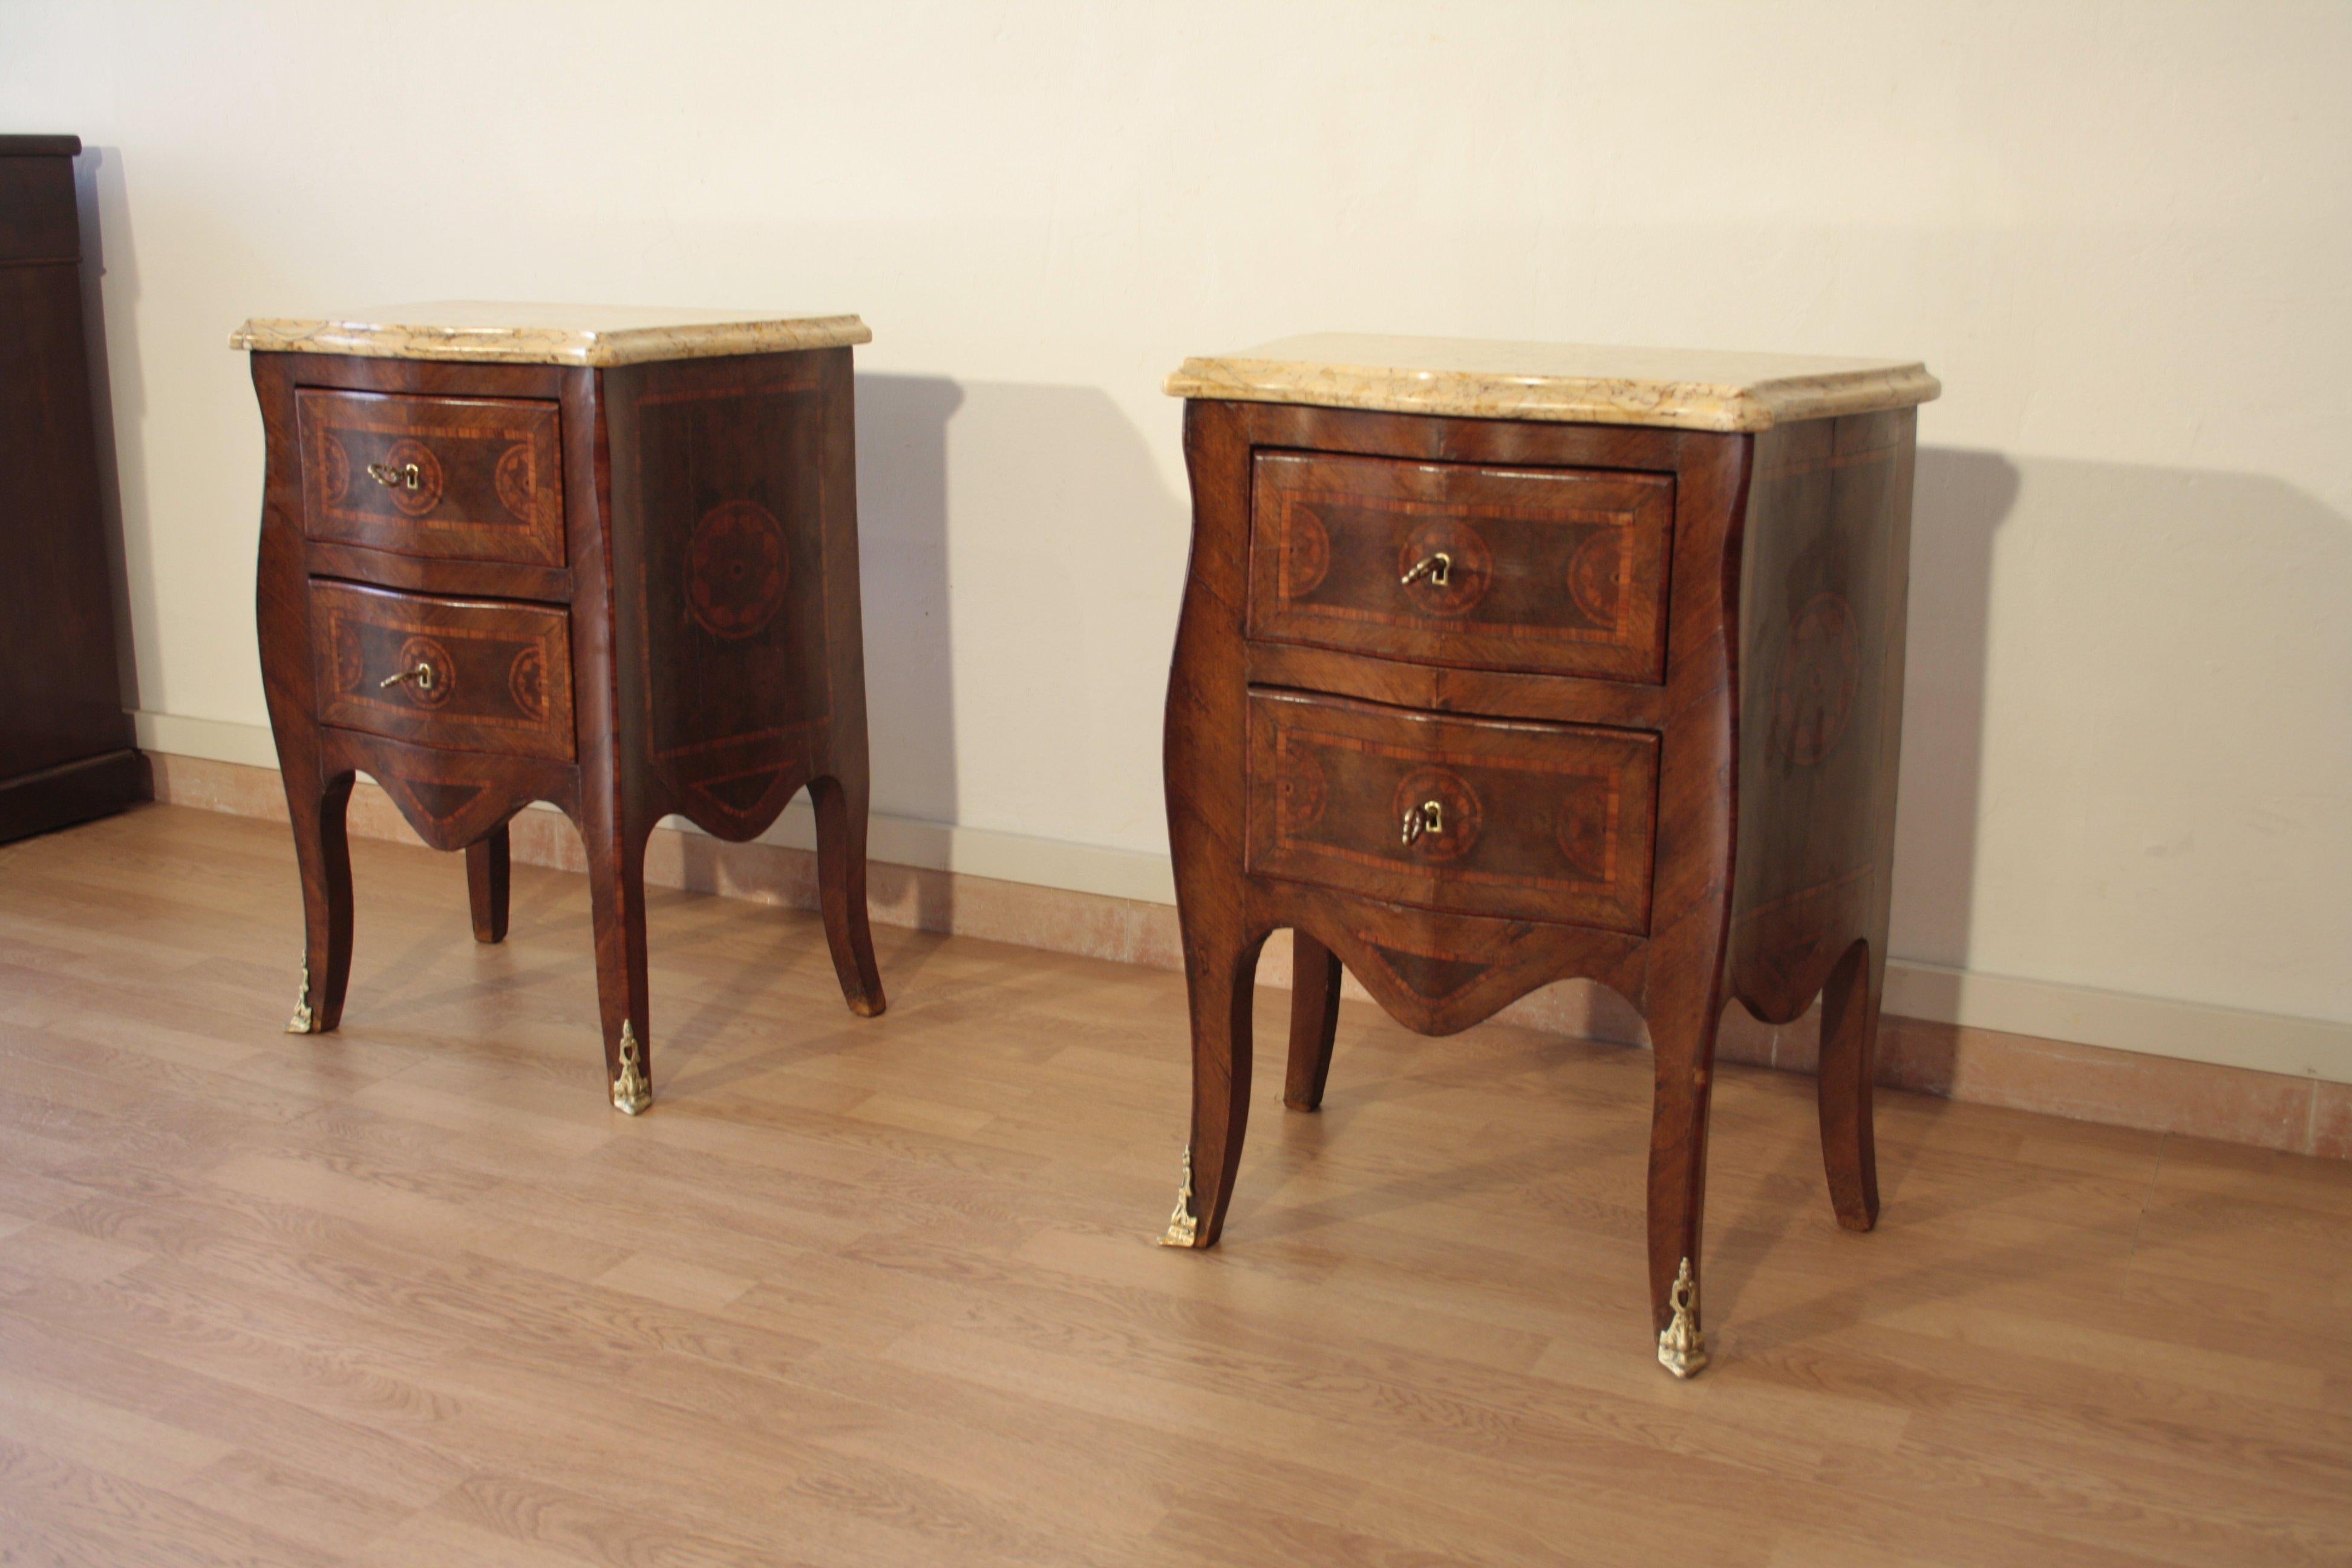 Louis XV style bedside tables.

Built in southern Italy, in the Neapolitan area, they are a historical reproduction of great quality.

Solid wood structure. In walnut wood with inlay work and briar inserts of various precious woods.

Dimensions 36 x